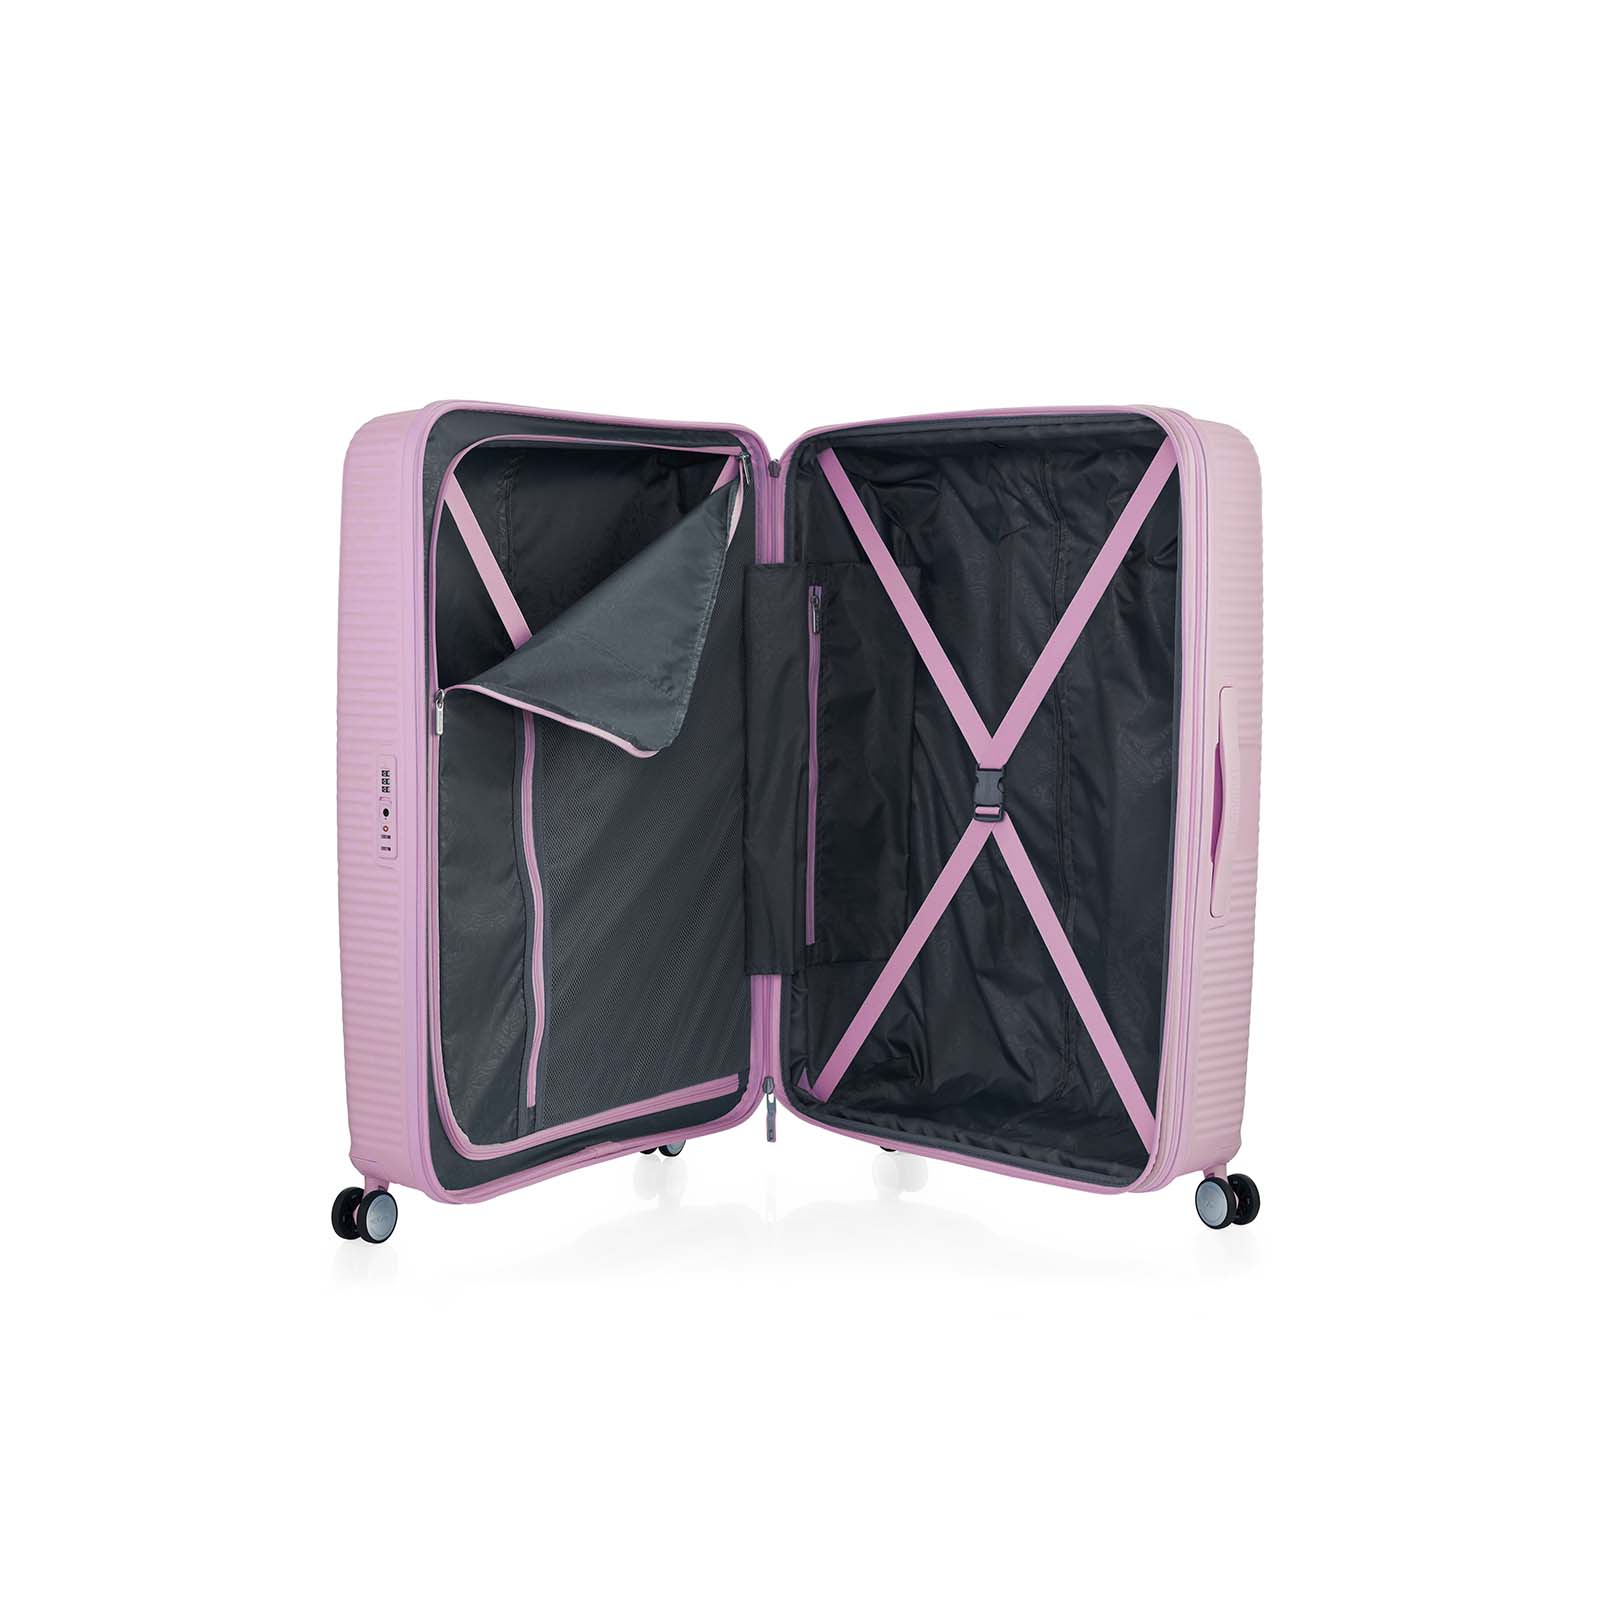 American-Tourister-Curio-2-80cm-Suitcase-Fresh-Pink-Open